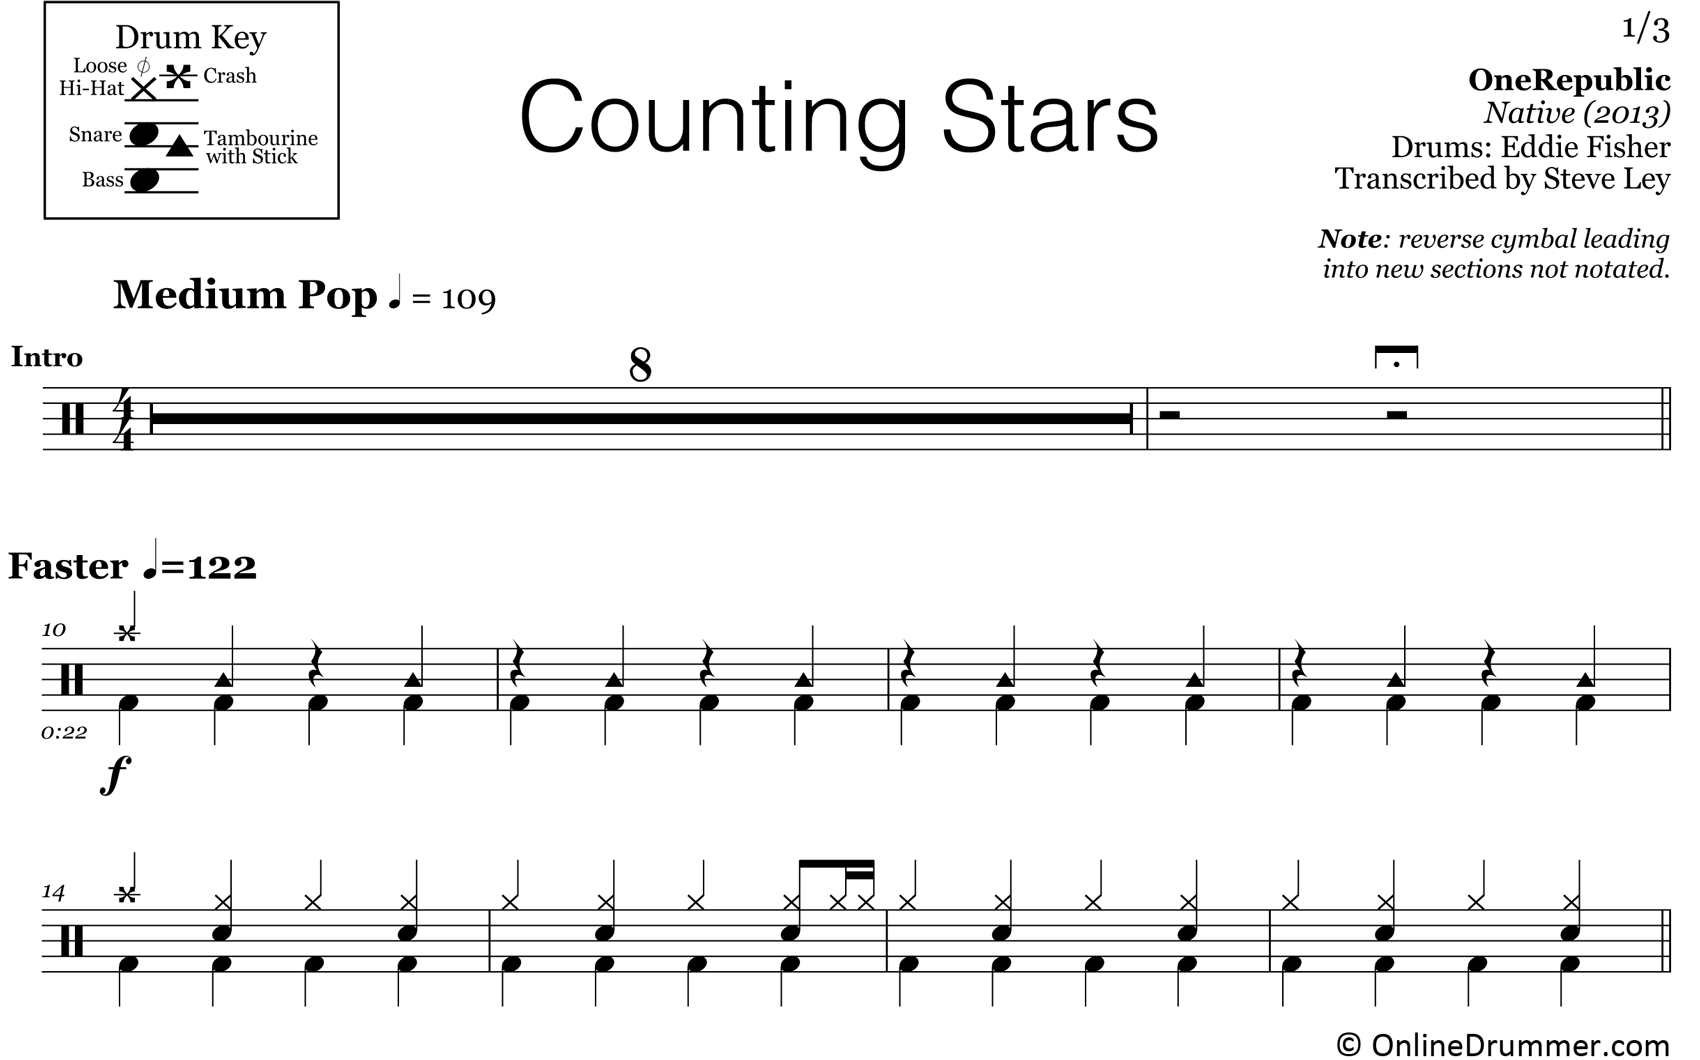 Counting Stars - One Republic - Drum Sheet Music